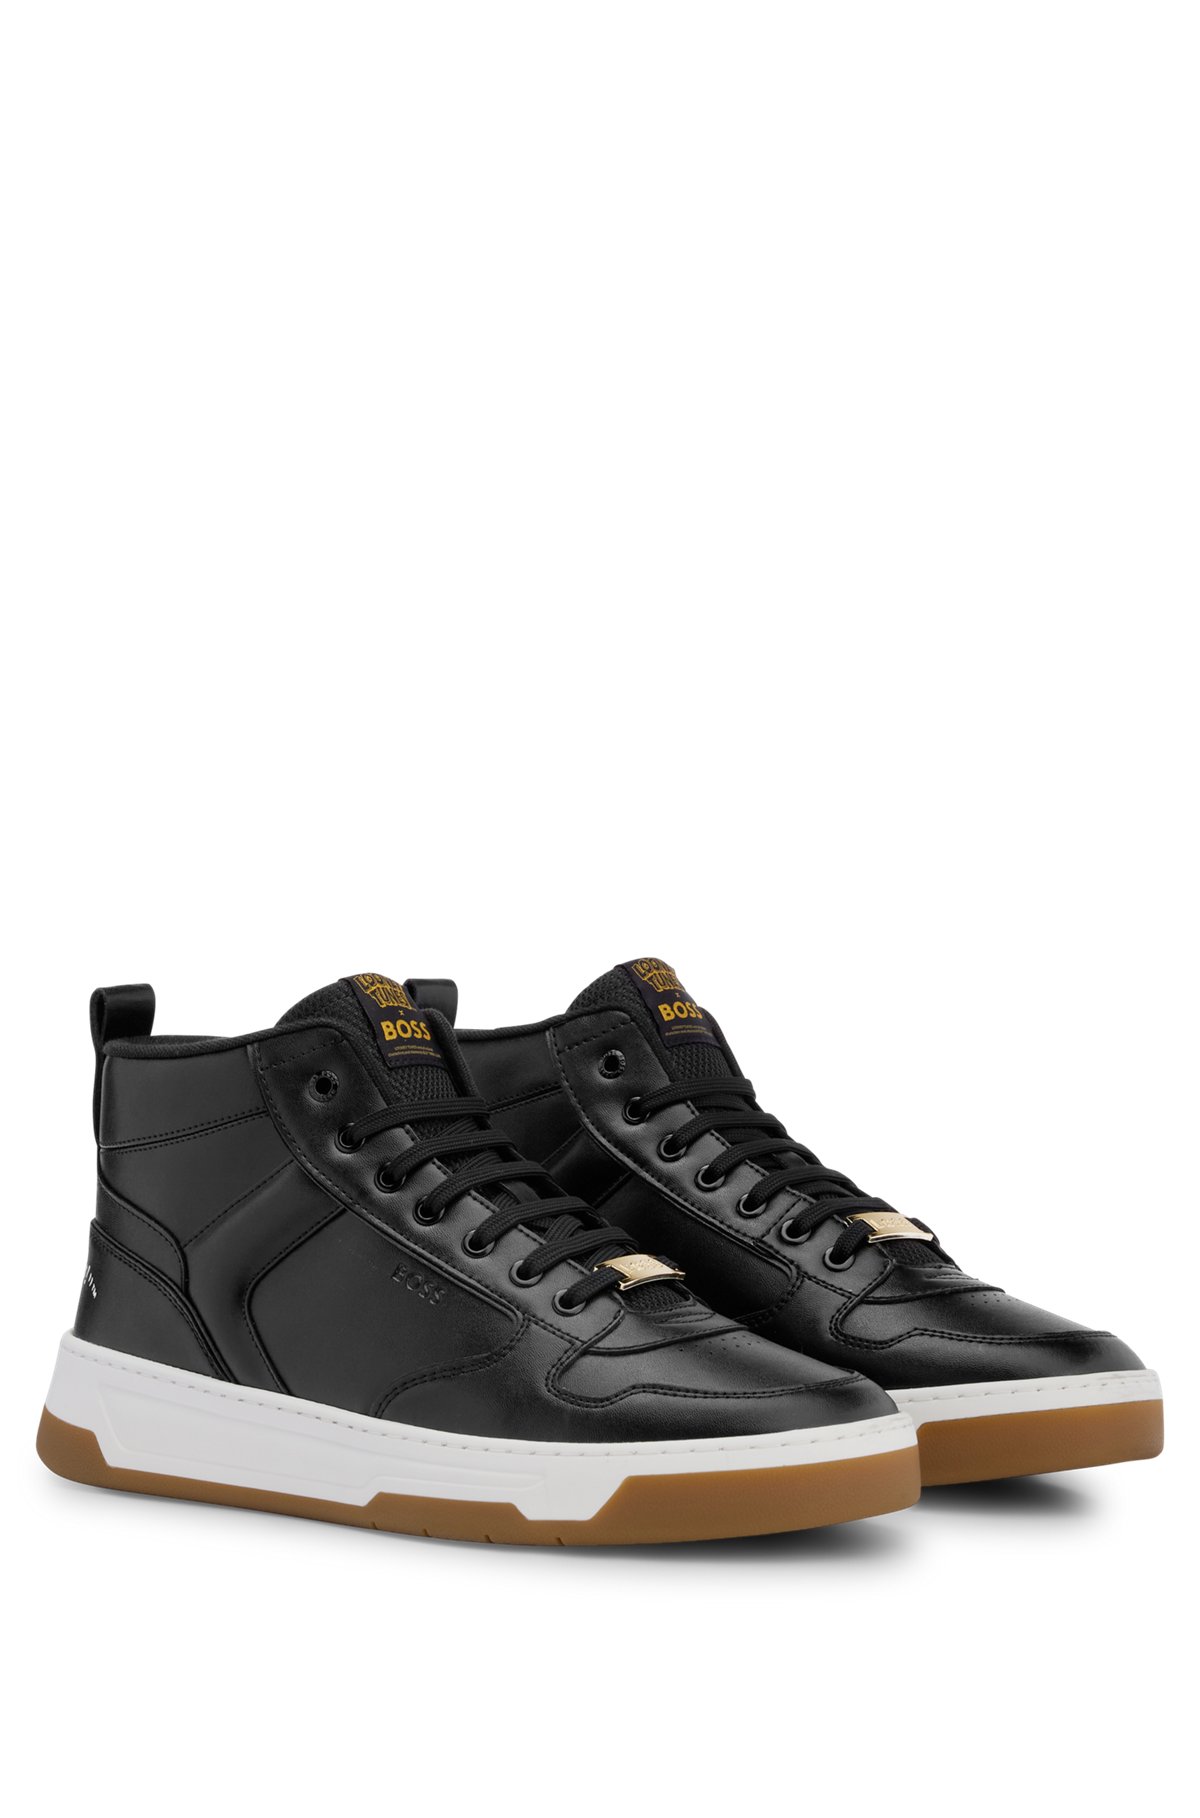 Looney Tunes x BOSS High-top trainers with slogan detailing and logo, Black